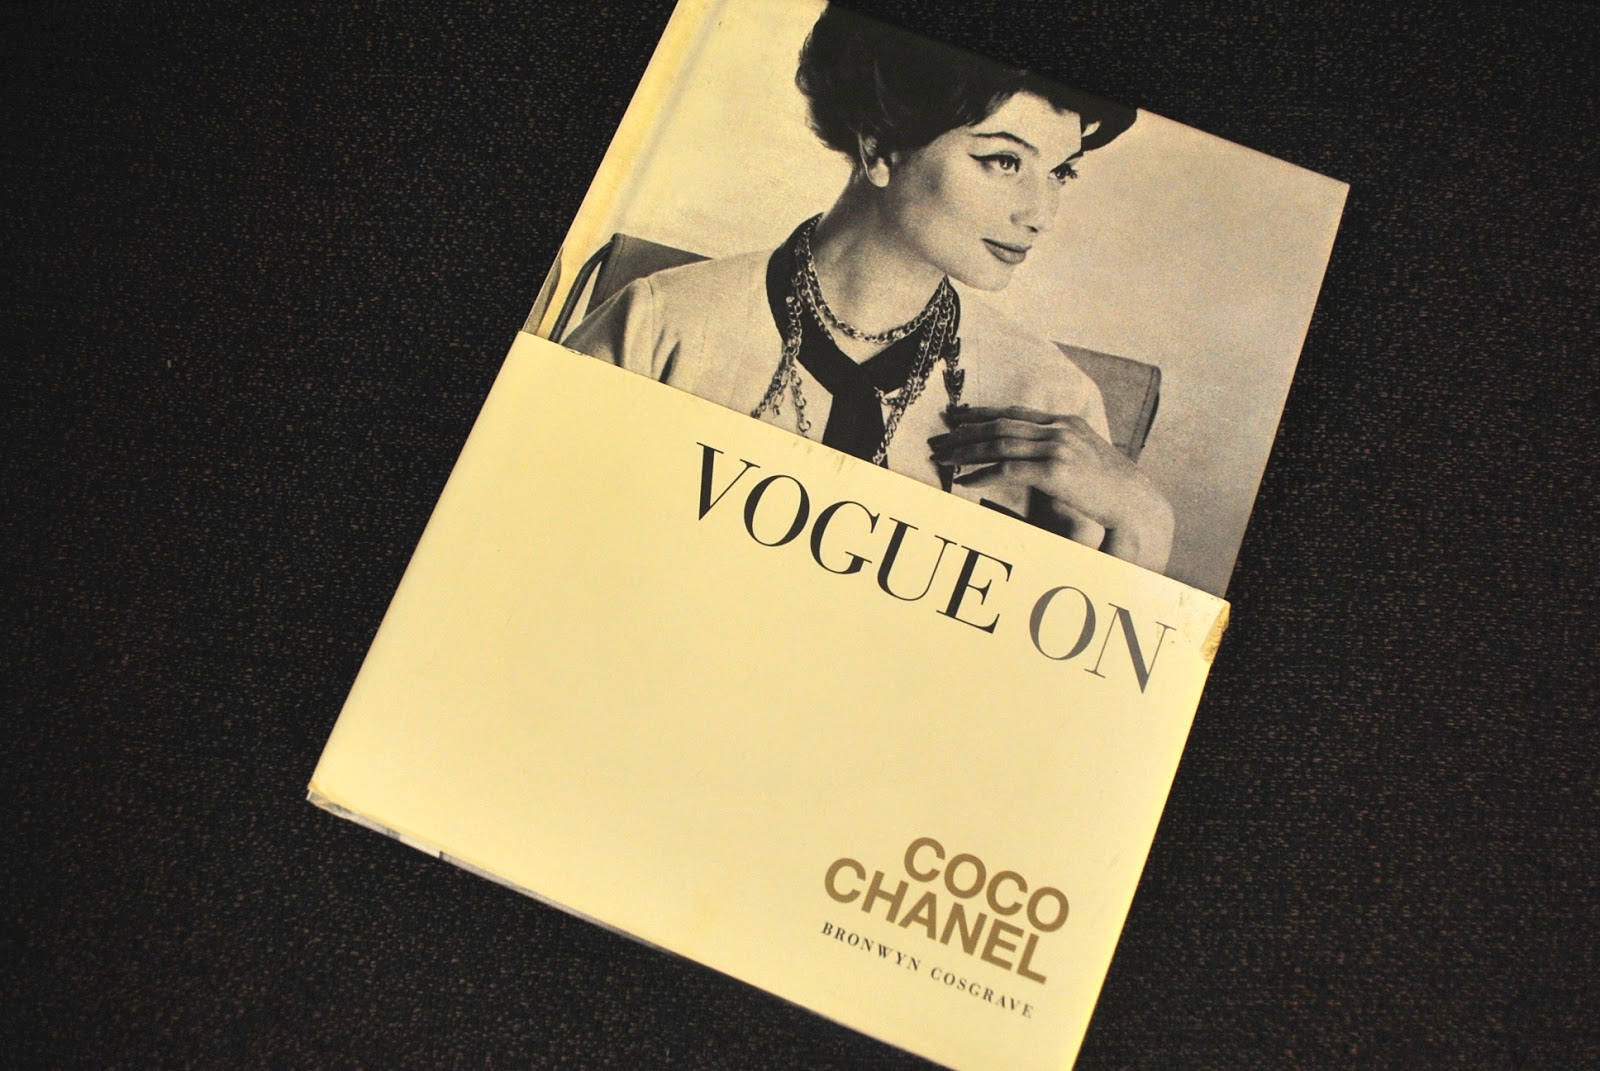 THE MAIDEN MANIFESTO: Vogue on Coco Chanel by Bronwyn Cosgrave